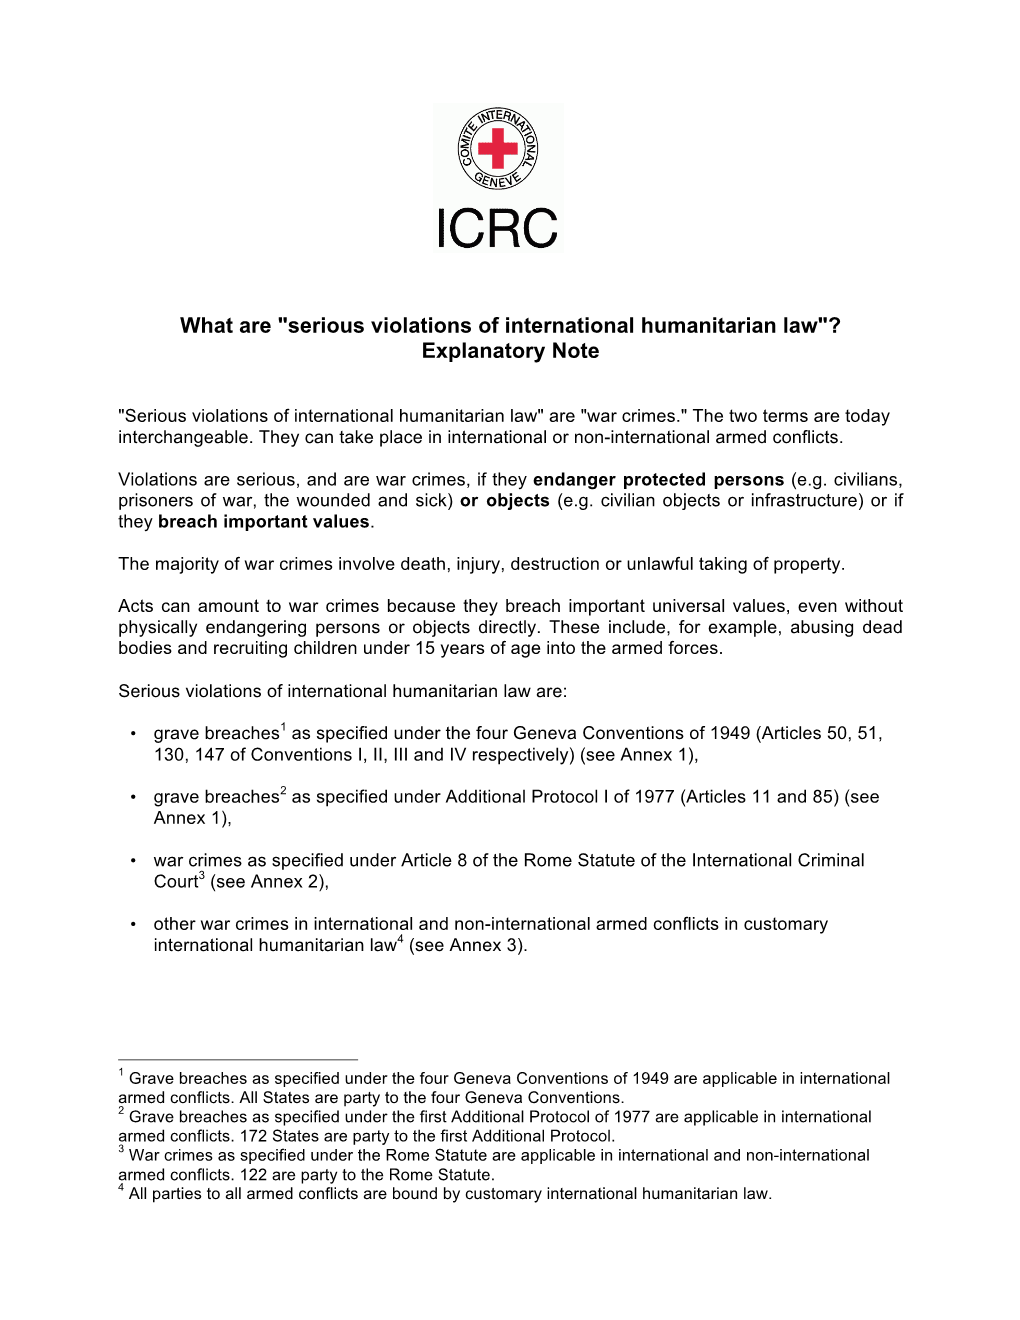 What Are "Serious Violations of International Humanitarian Law"? Explanatory Note